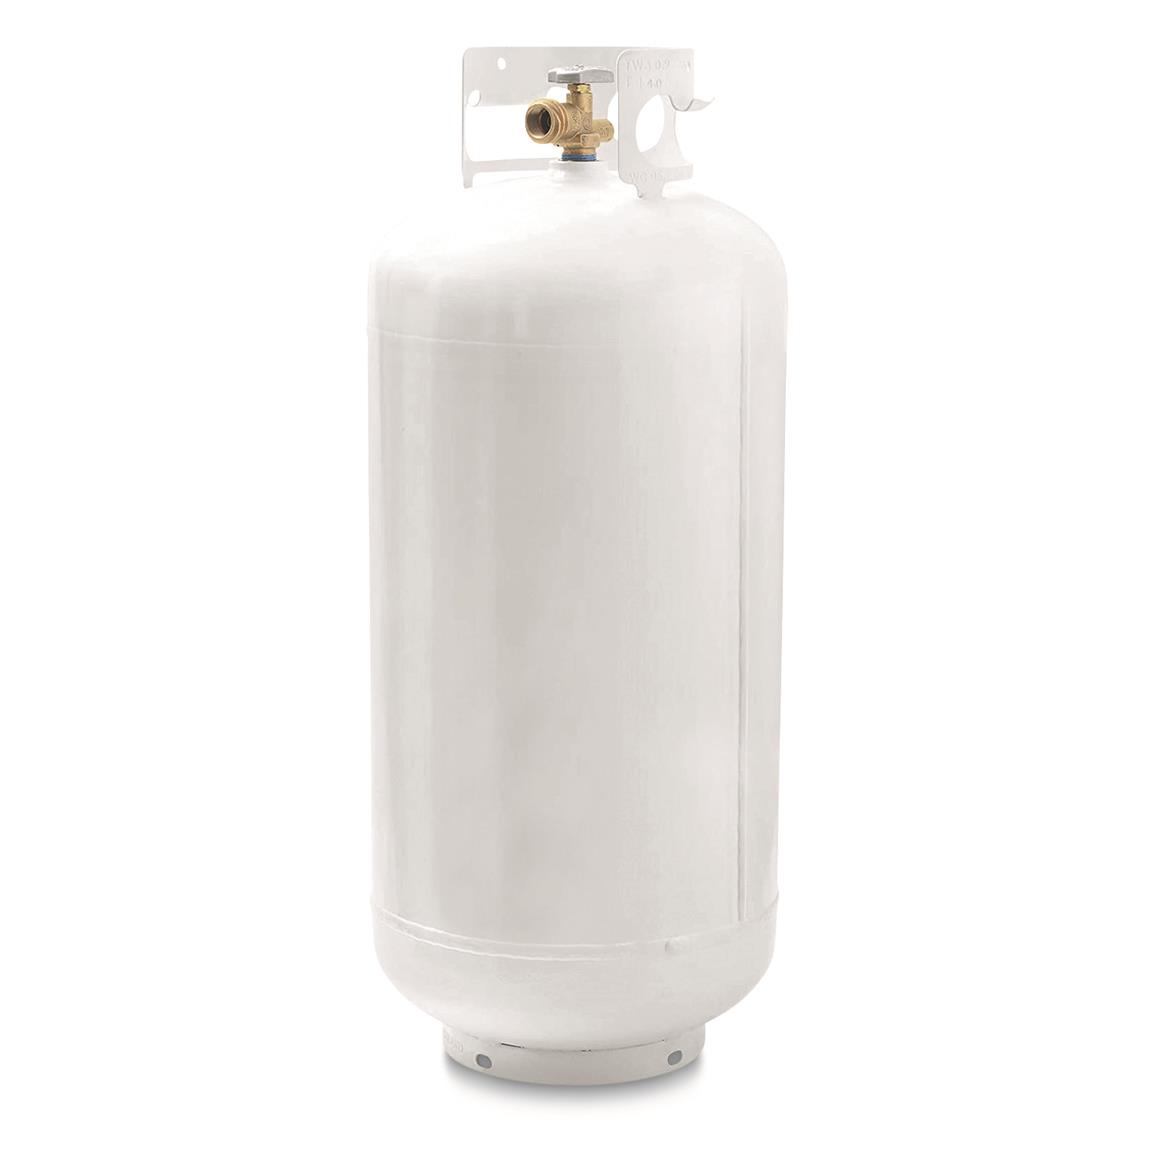 Flame King 40-lb. Propane Tank Cylinder With OPD Valve